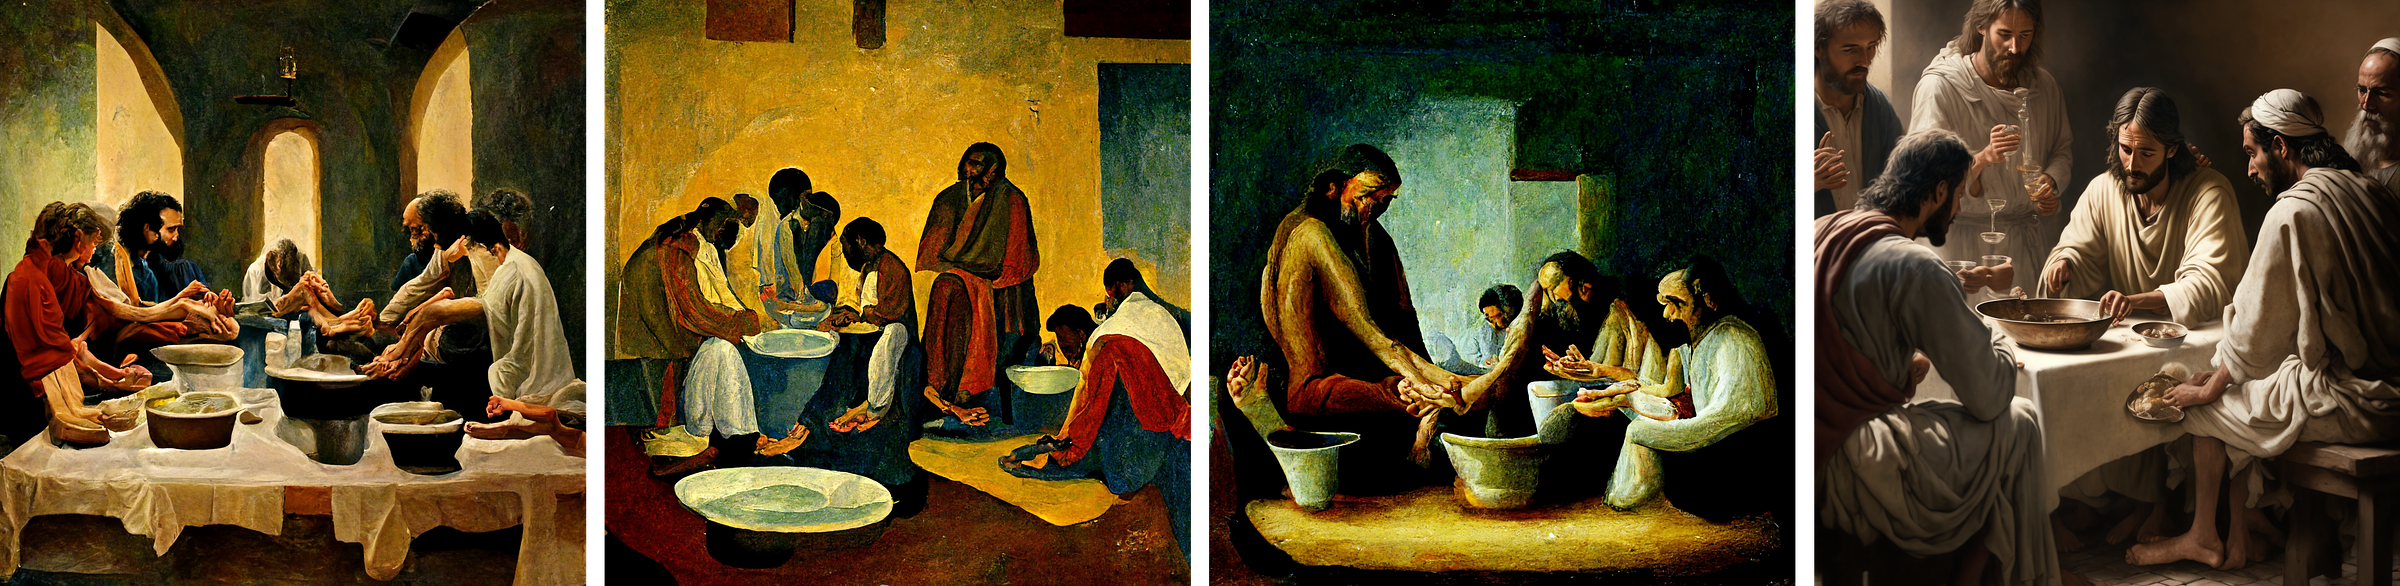 The first image depicts loosely defined figures sitting on either side of a table in a room. The table is covered with a white cloth and holds large bowls of water. They are holding feet-like objects. The figures' arms extend over the bowls, with their hands merging into foot-like appendages. A central figure faces the viewer, while doorways in the background create depth. The second image shows loosely defined figures sitting at a table and on the floor, with rough details. In the third image, roughly painted figures sit on the ground in a room, reaching over bowls. An opening in the wall hints at a crucifix shape in the background. The fourth image portrays six robed men around a small table, with one reaching for a bowl. It has a detailed, painterly, semi-realistic and kitschy style often seen in contemporary popular Western Christian-themed art.